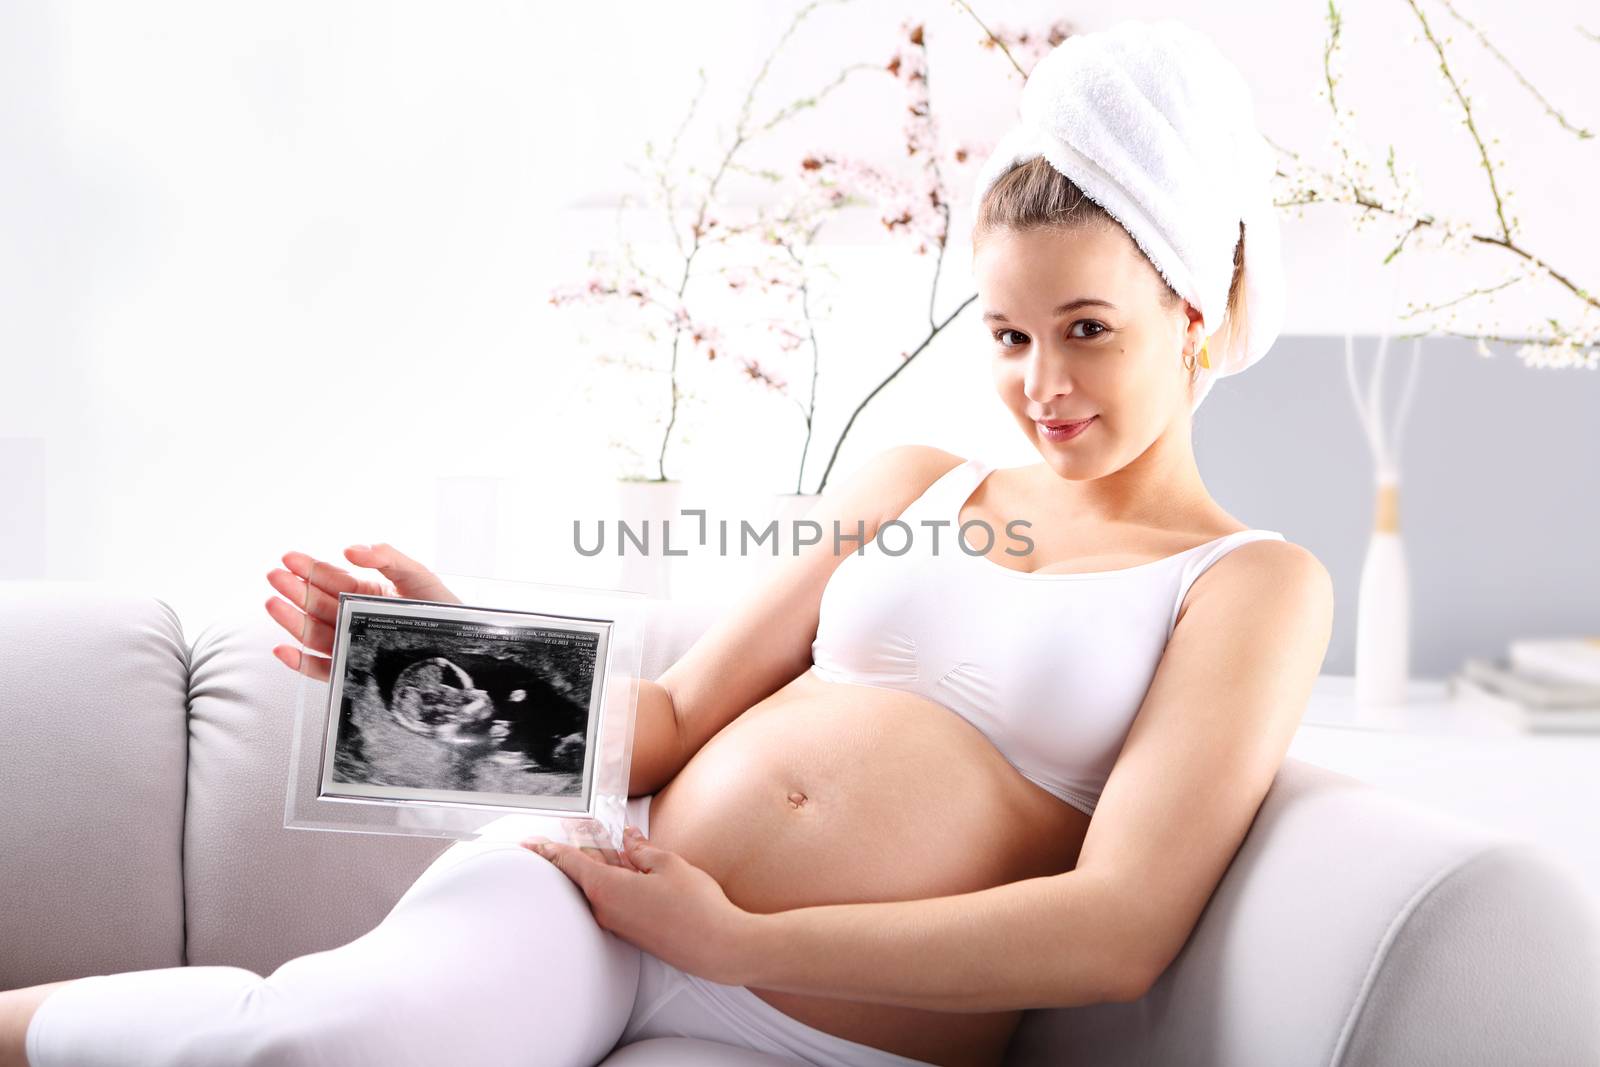 Young expectant mother ultrasound shows the baby sitting on the sofa